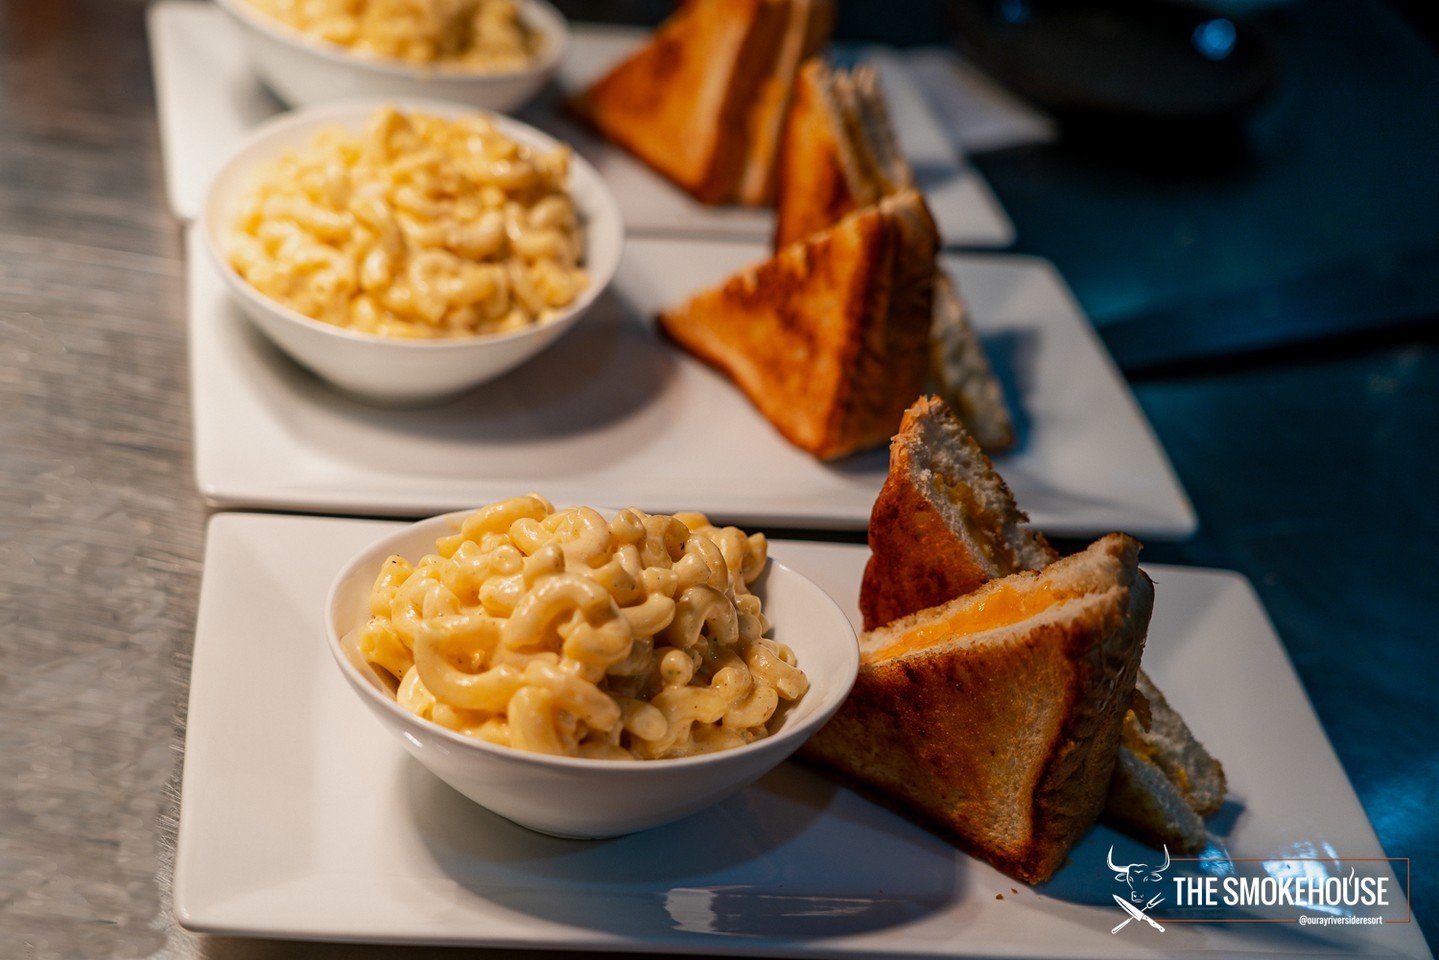 Kiddie comfort food done RIGHT.  Mac 'n' cheese + grilled cheese, Chef Rene-style.  We reopen May 17th - mark those calendars! 

#foodie #ouray #ouraycolorado #macncheese